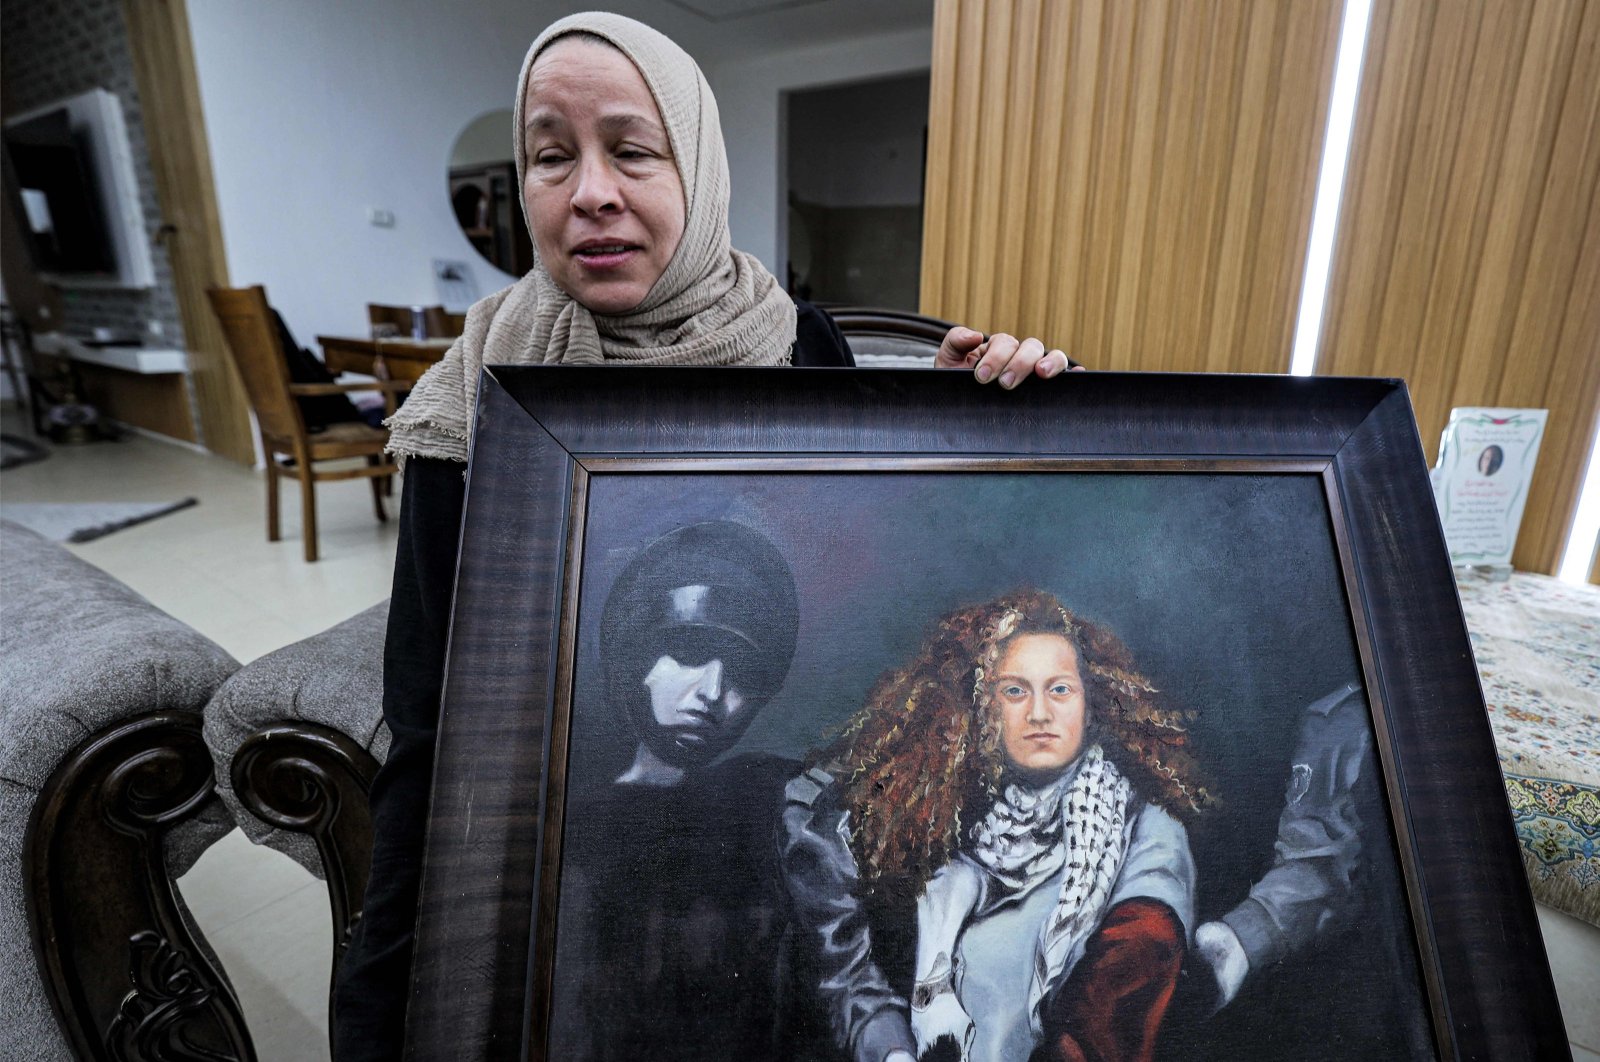 Nariman Tamimi, mother of detained Palestinian activist Ahed Tamimi, holds a framed painting depicting her daughter as she sits in their family home in the village of Nabi Saleh in the occupied West Bank, Palestine, Nov. 6, 2023. (AFP Photo)